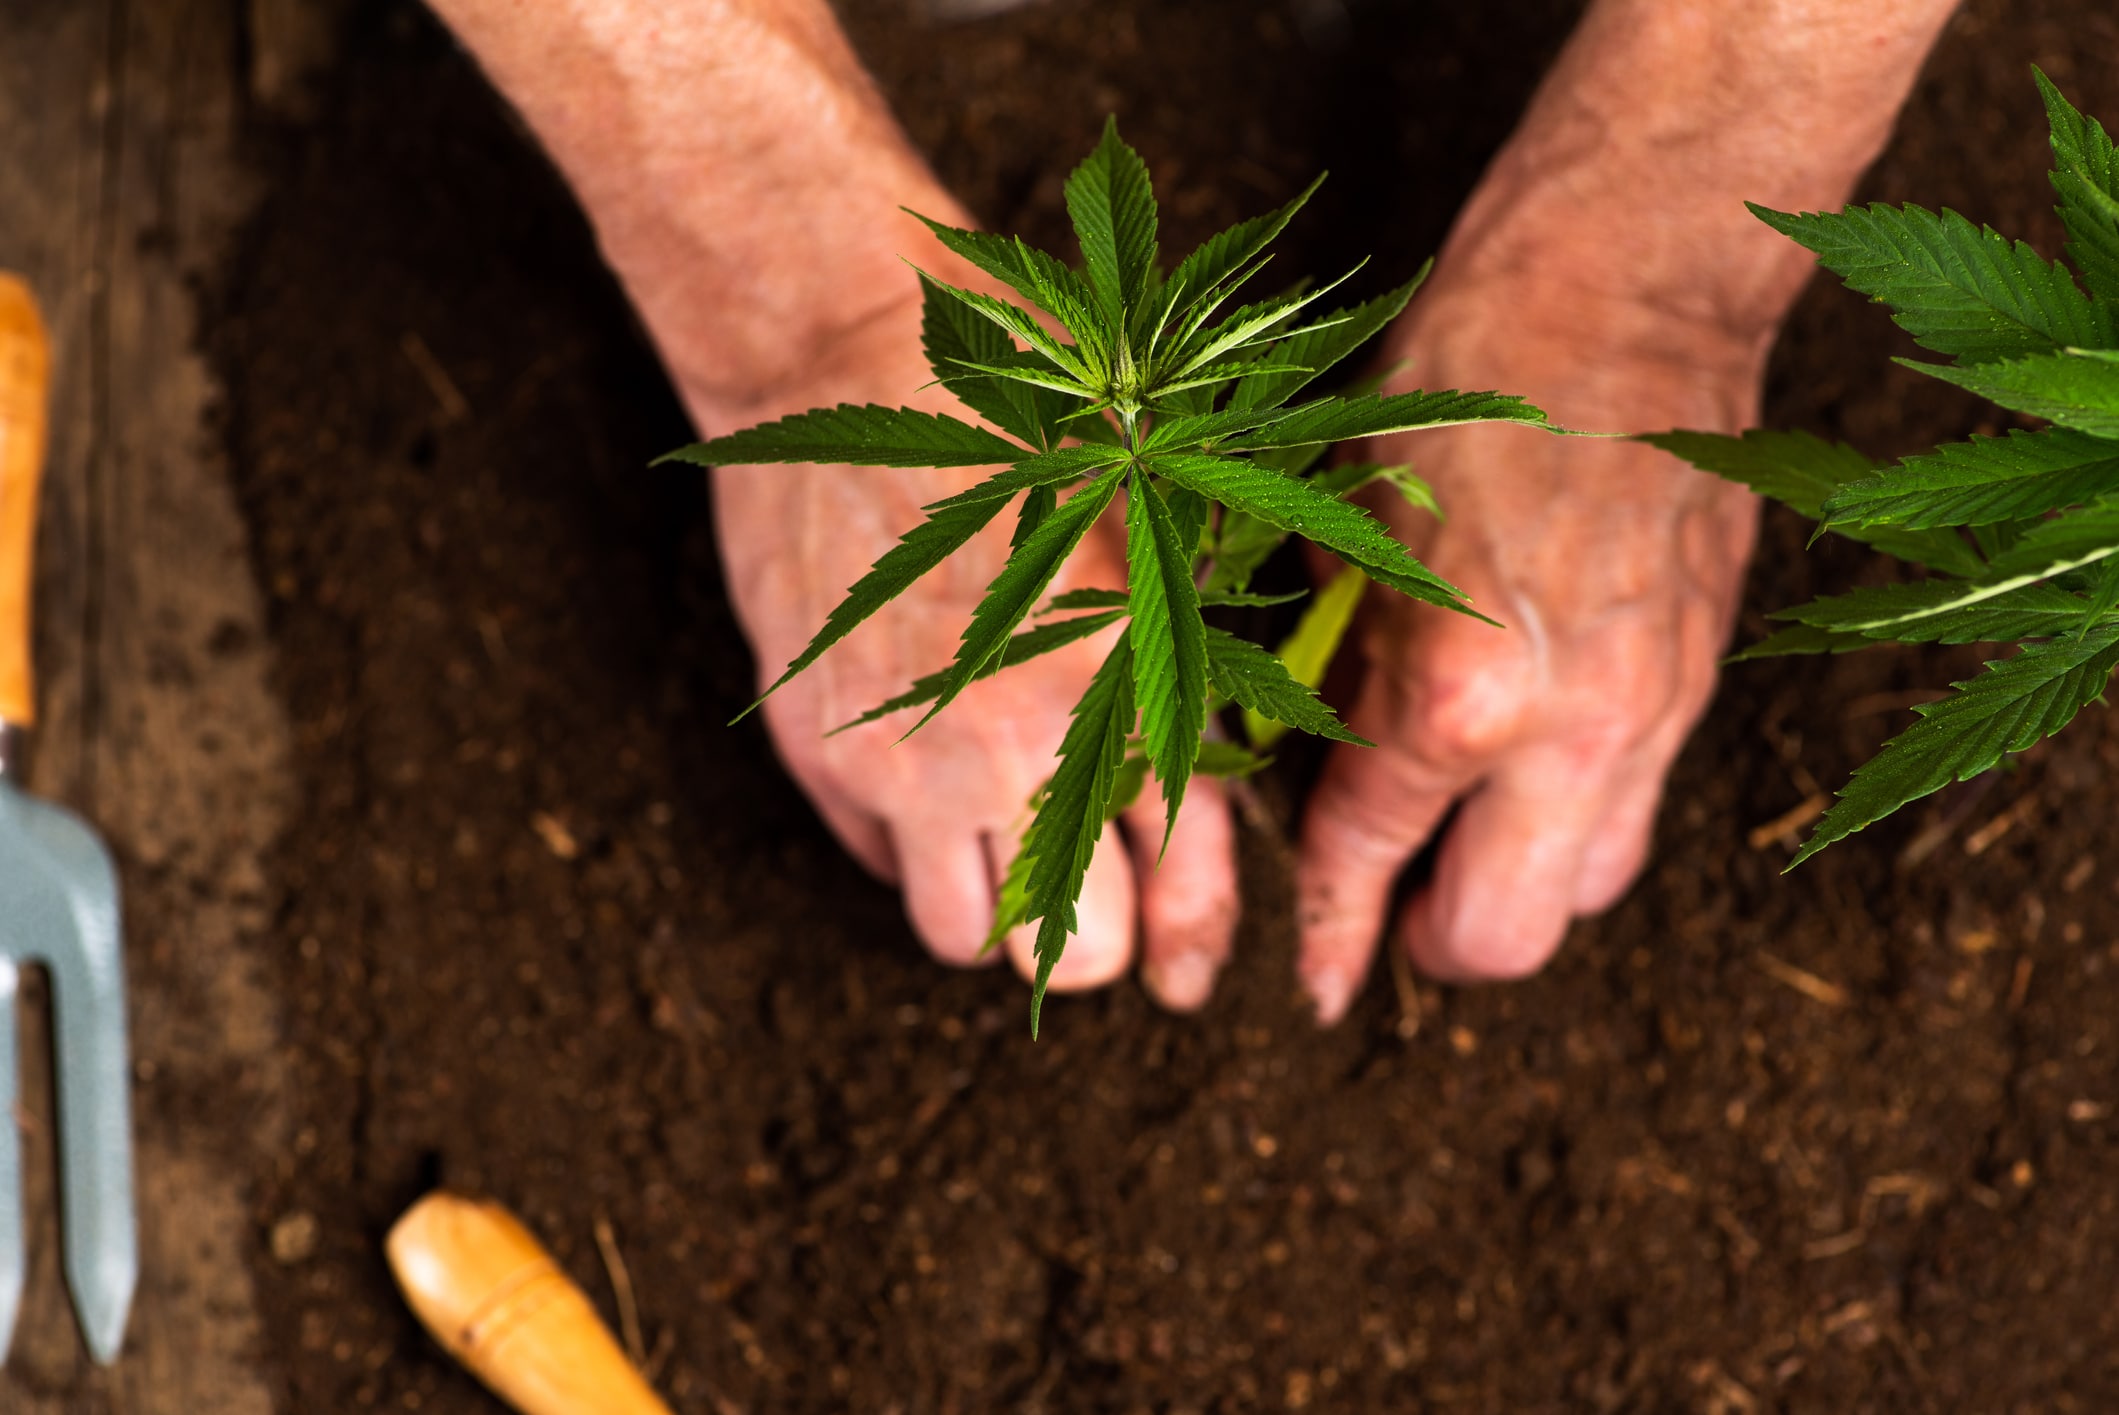 How to Clone Cannabis: The Beginner's Guide - Person planting industrial hemp in the soil